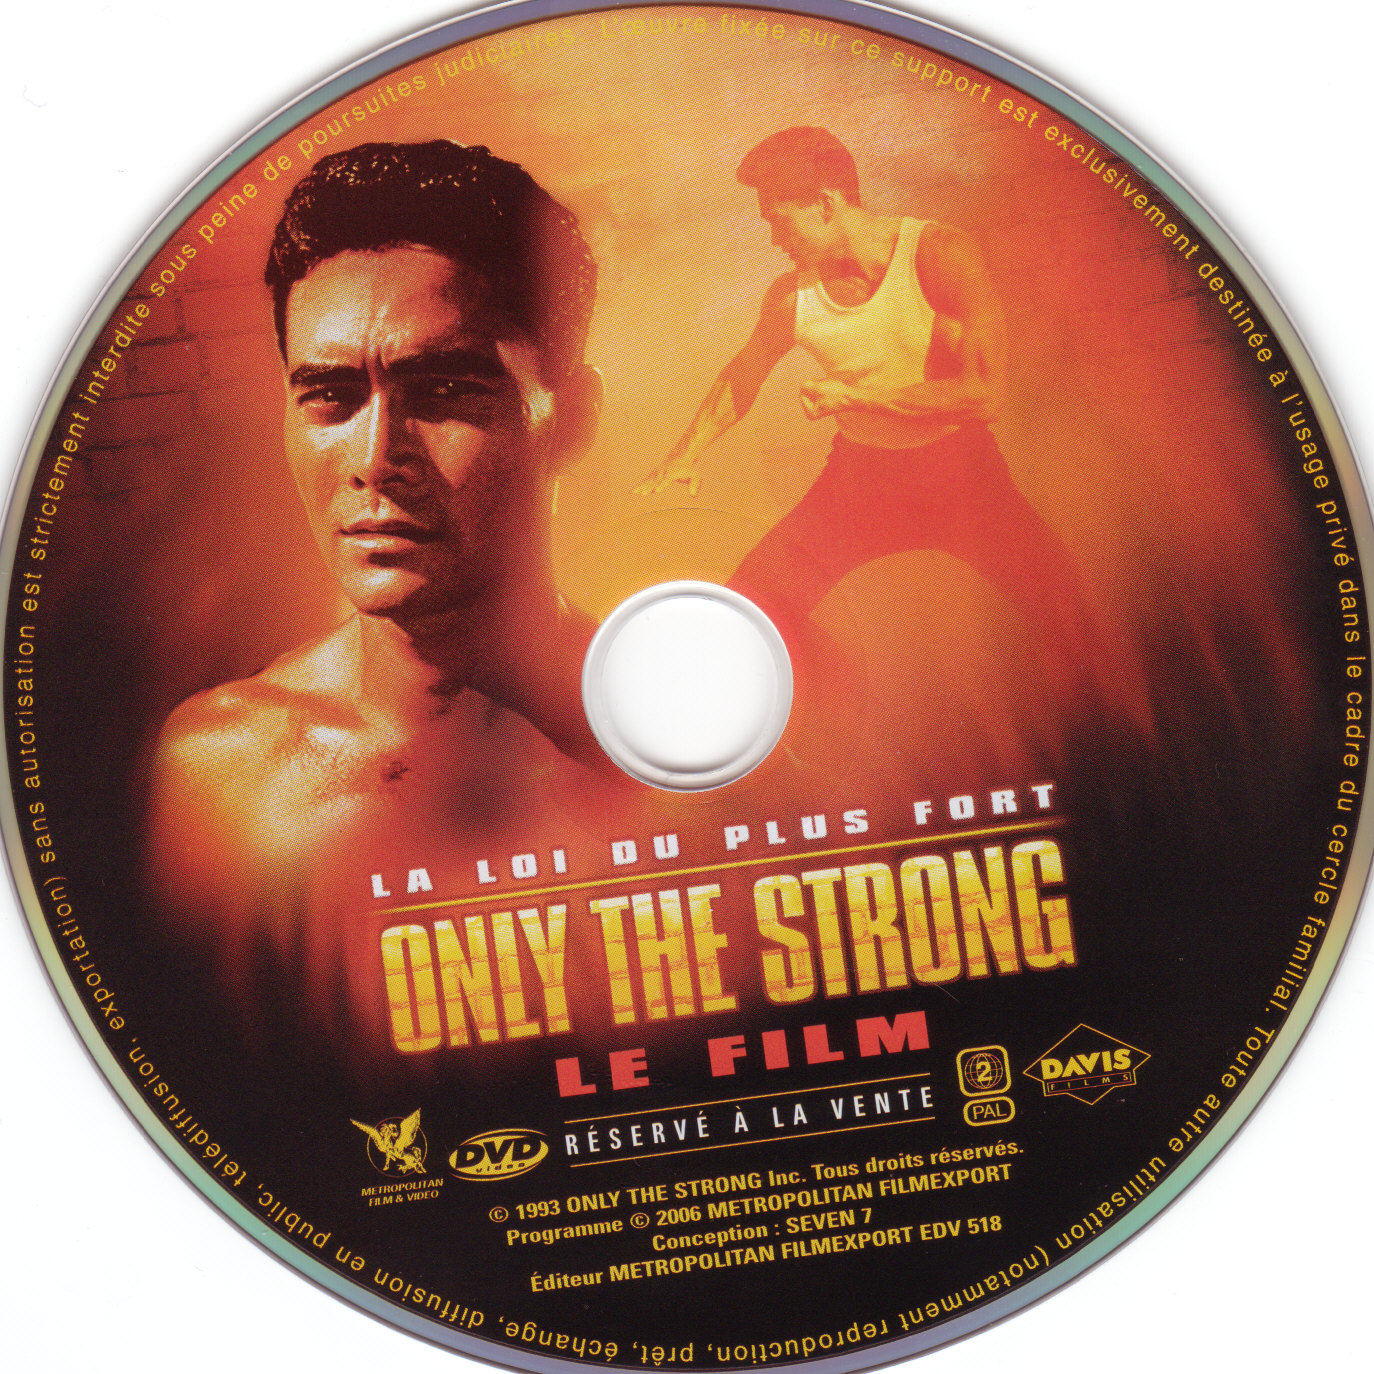 Only the strong DISC 1